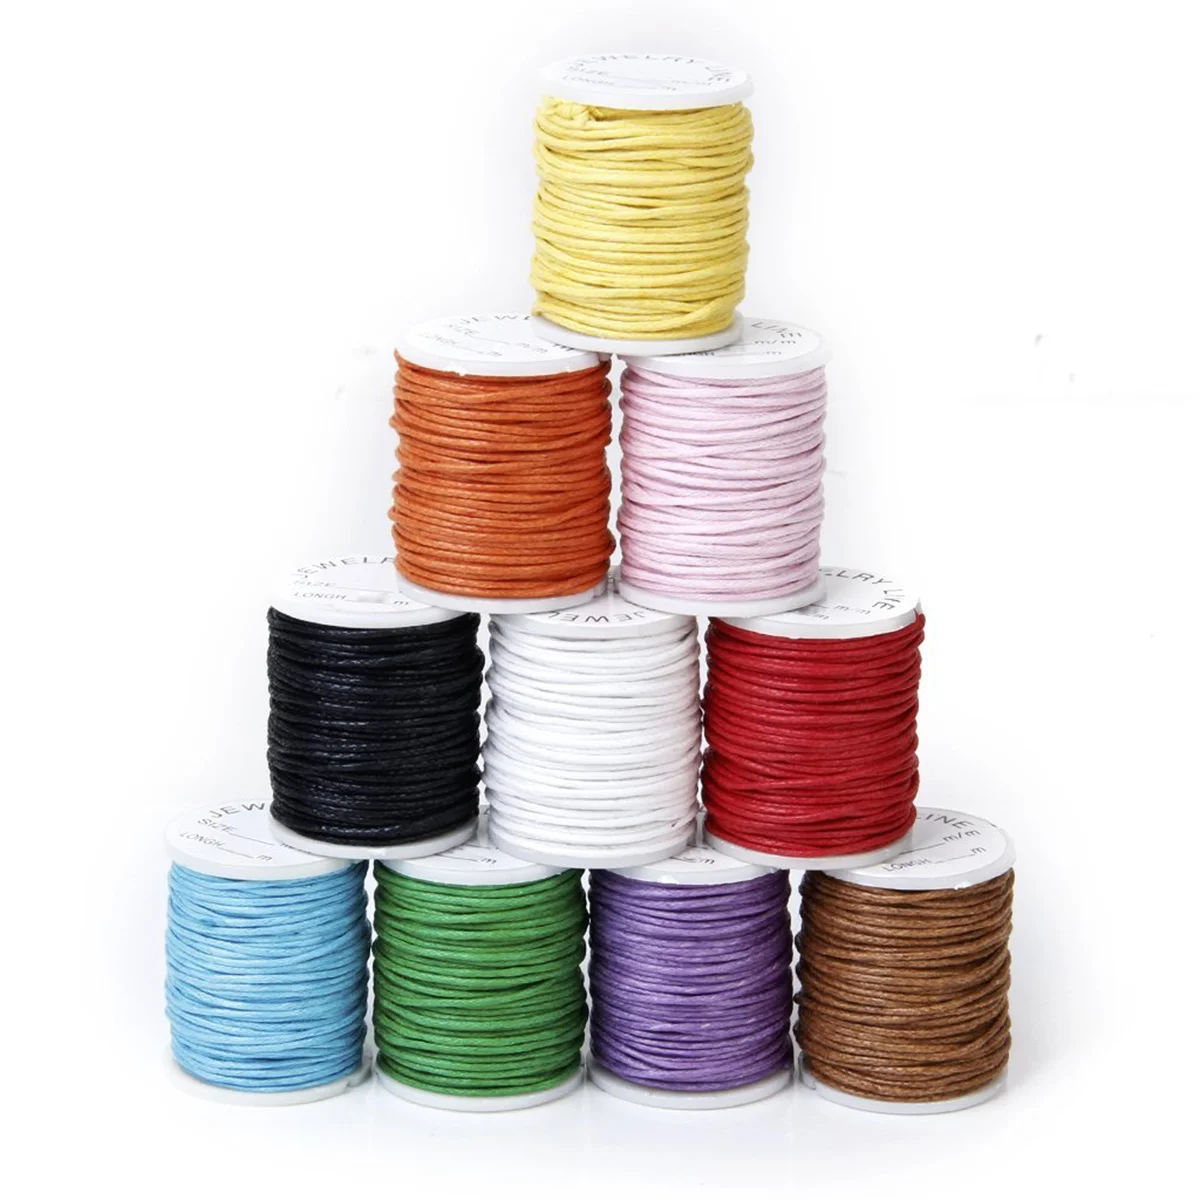 

10 Rolls Knitted Cotton Cord 4mm 1mm Knitting Cord Cotton Thread Rope Knitting Wax Line Knitting Yarn Waxed String